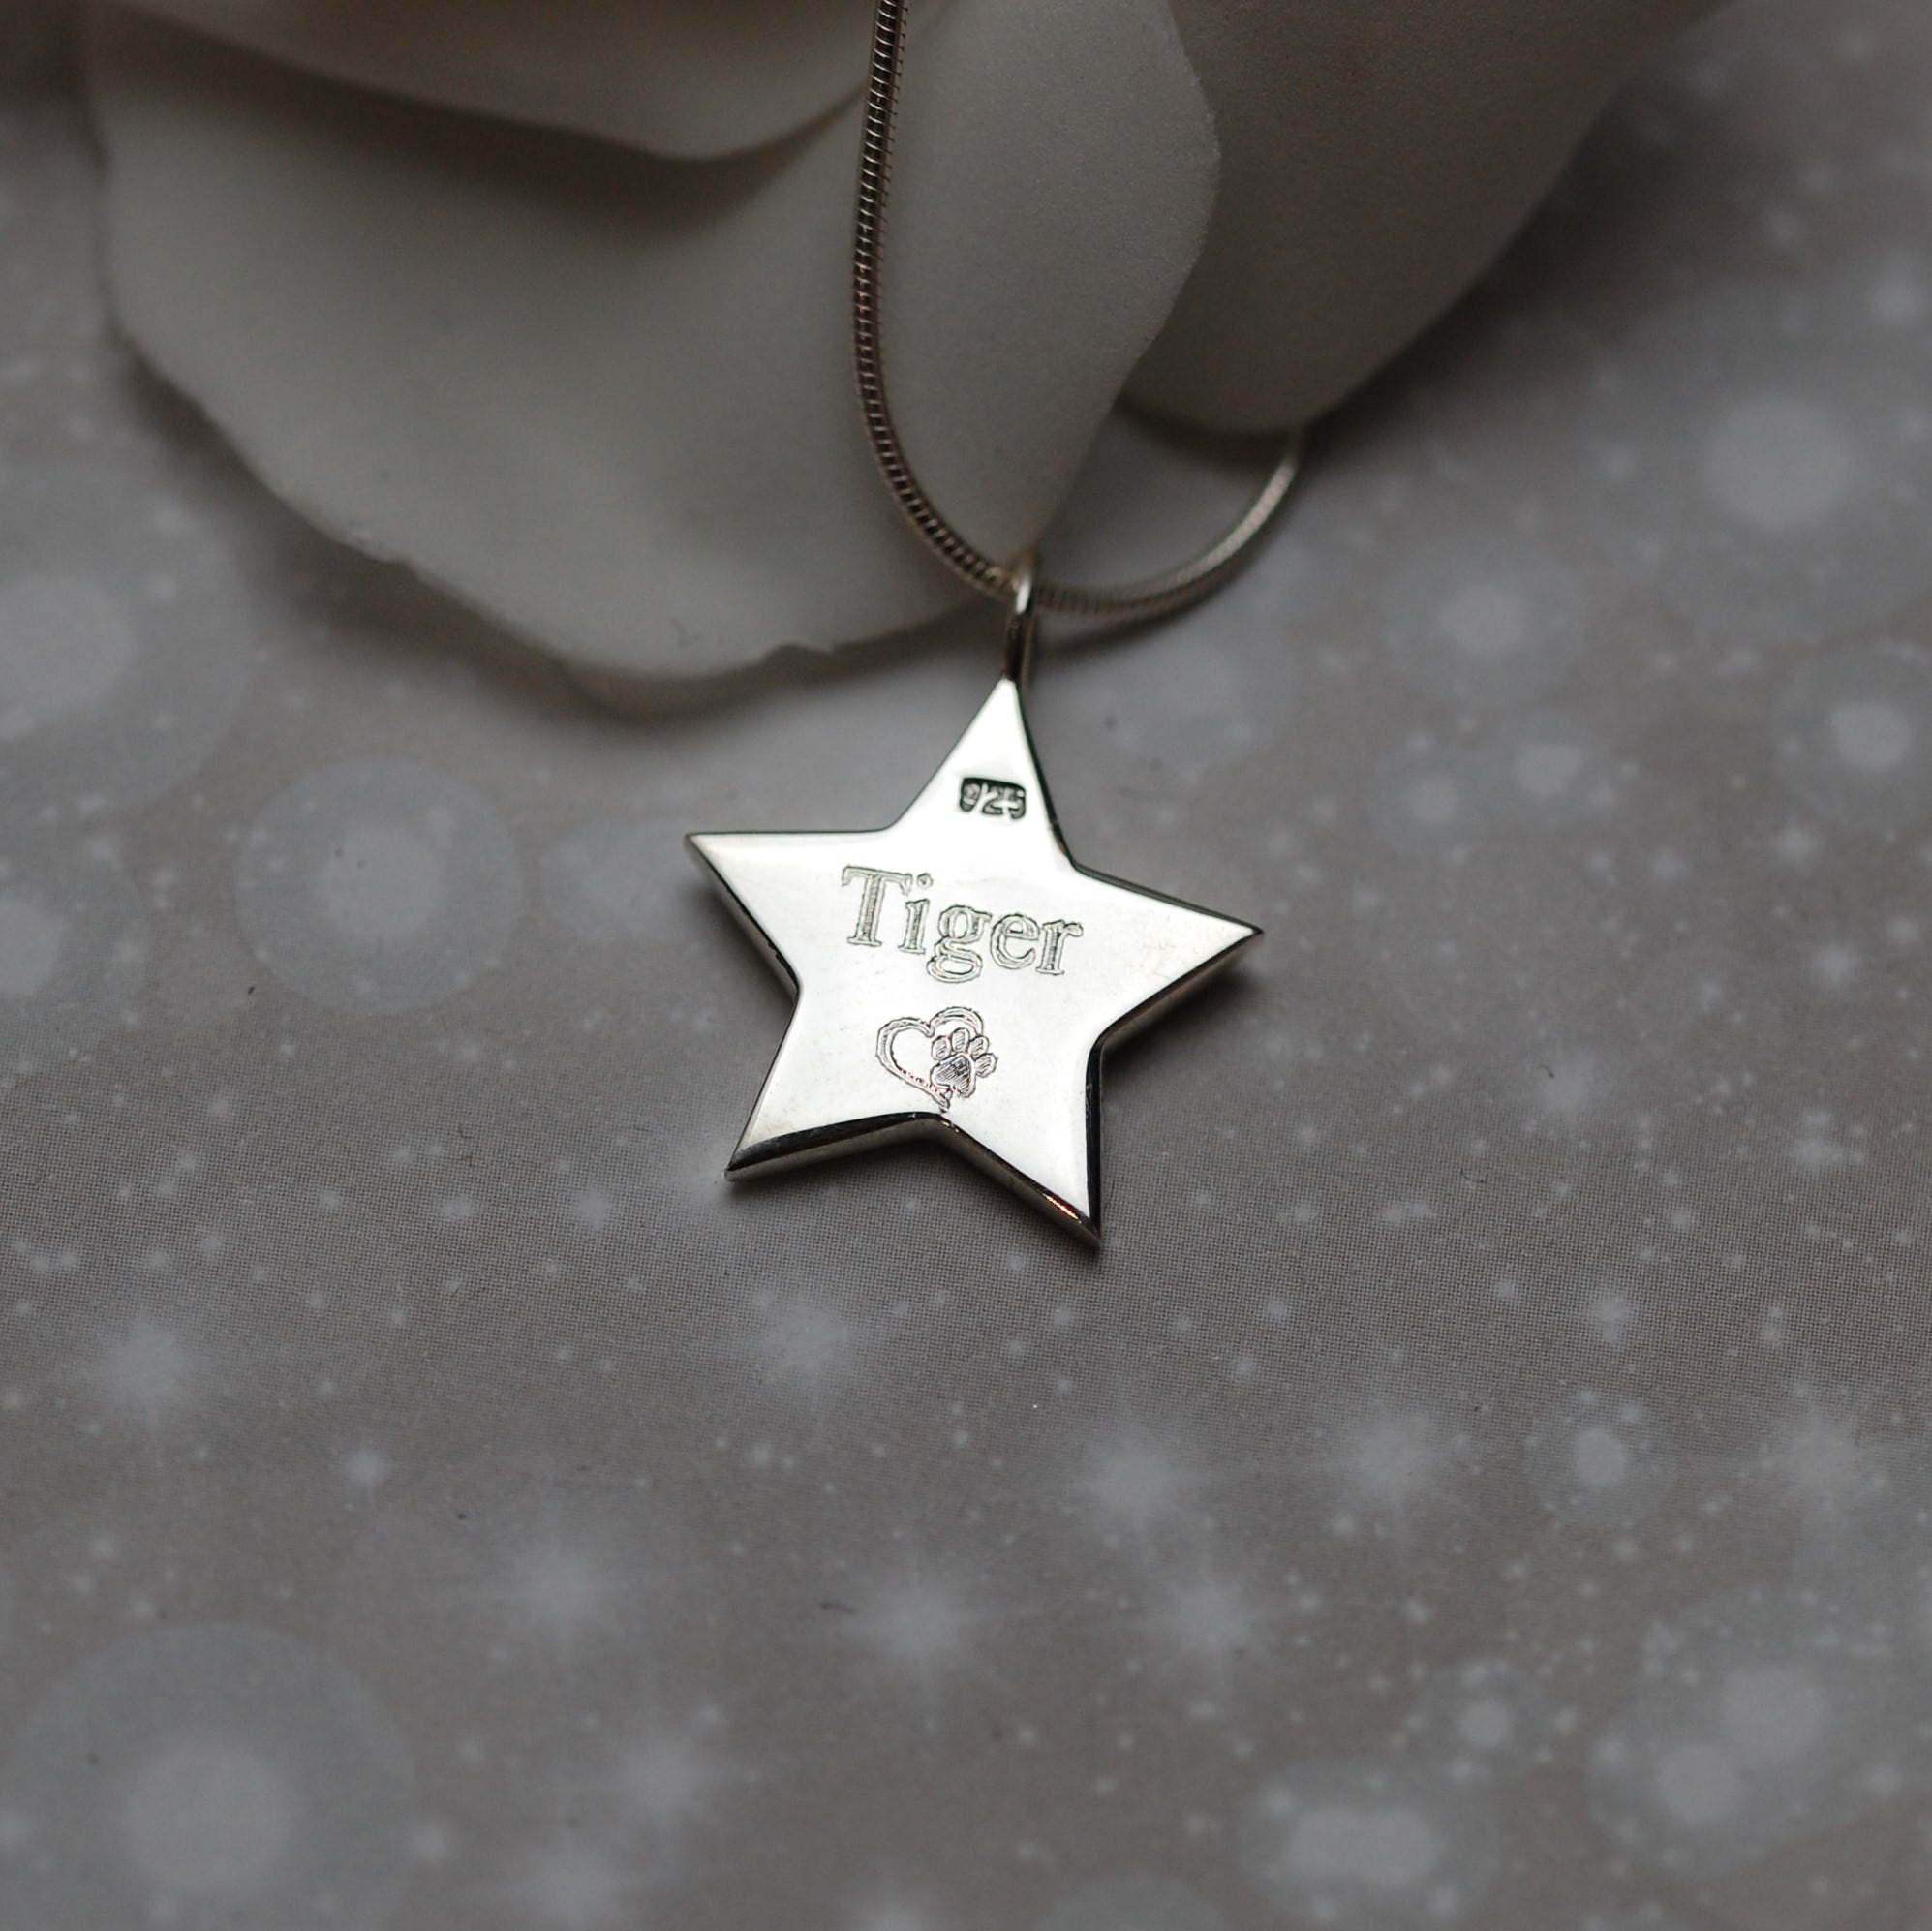 Pet name engraved on the back of silver star pendant with pet fur or cremation ashes